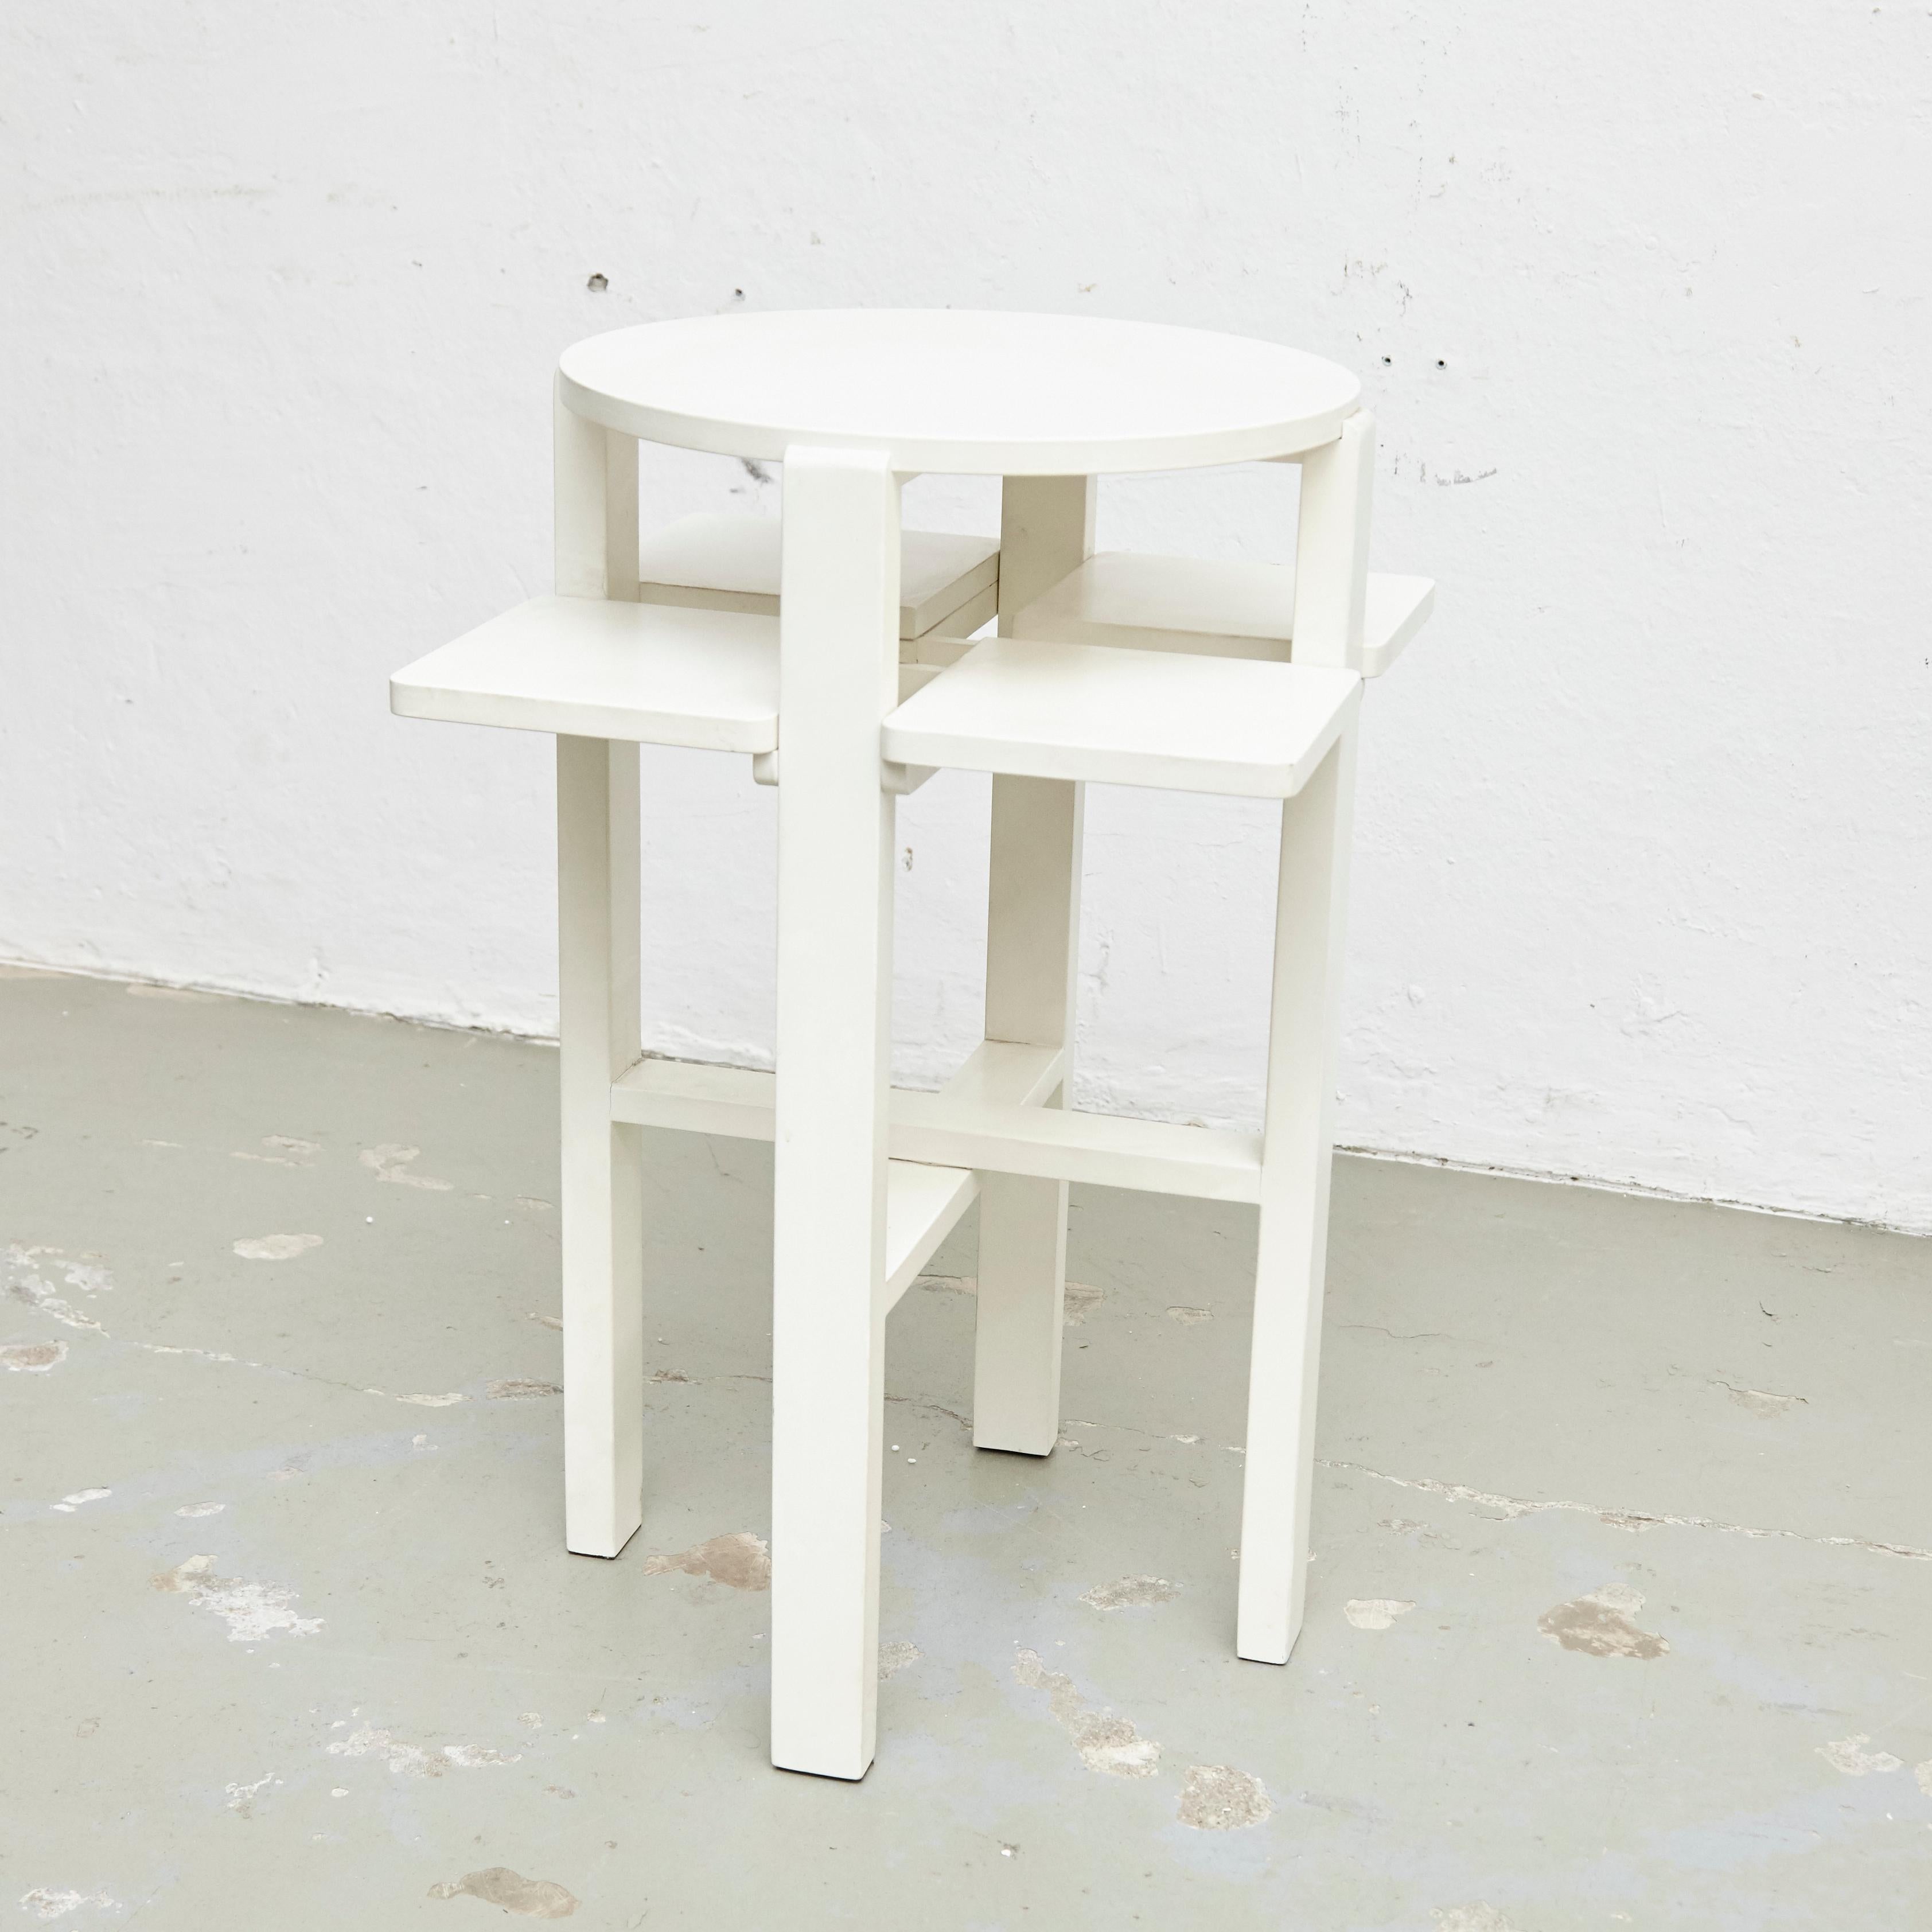 Side table designed by Charles Rennie Mackintosh in 1911.
Manufactured by BD, circa 1970.
White lacquered solid beechwood

In original condition, with minor wear consistent with age and use, preserving a beautiful patina.

Charles Rennie